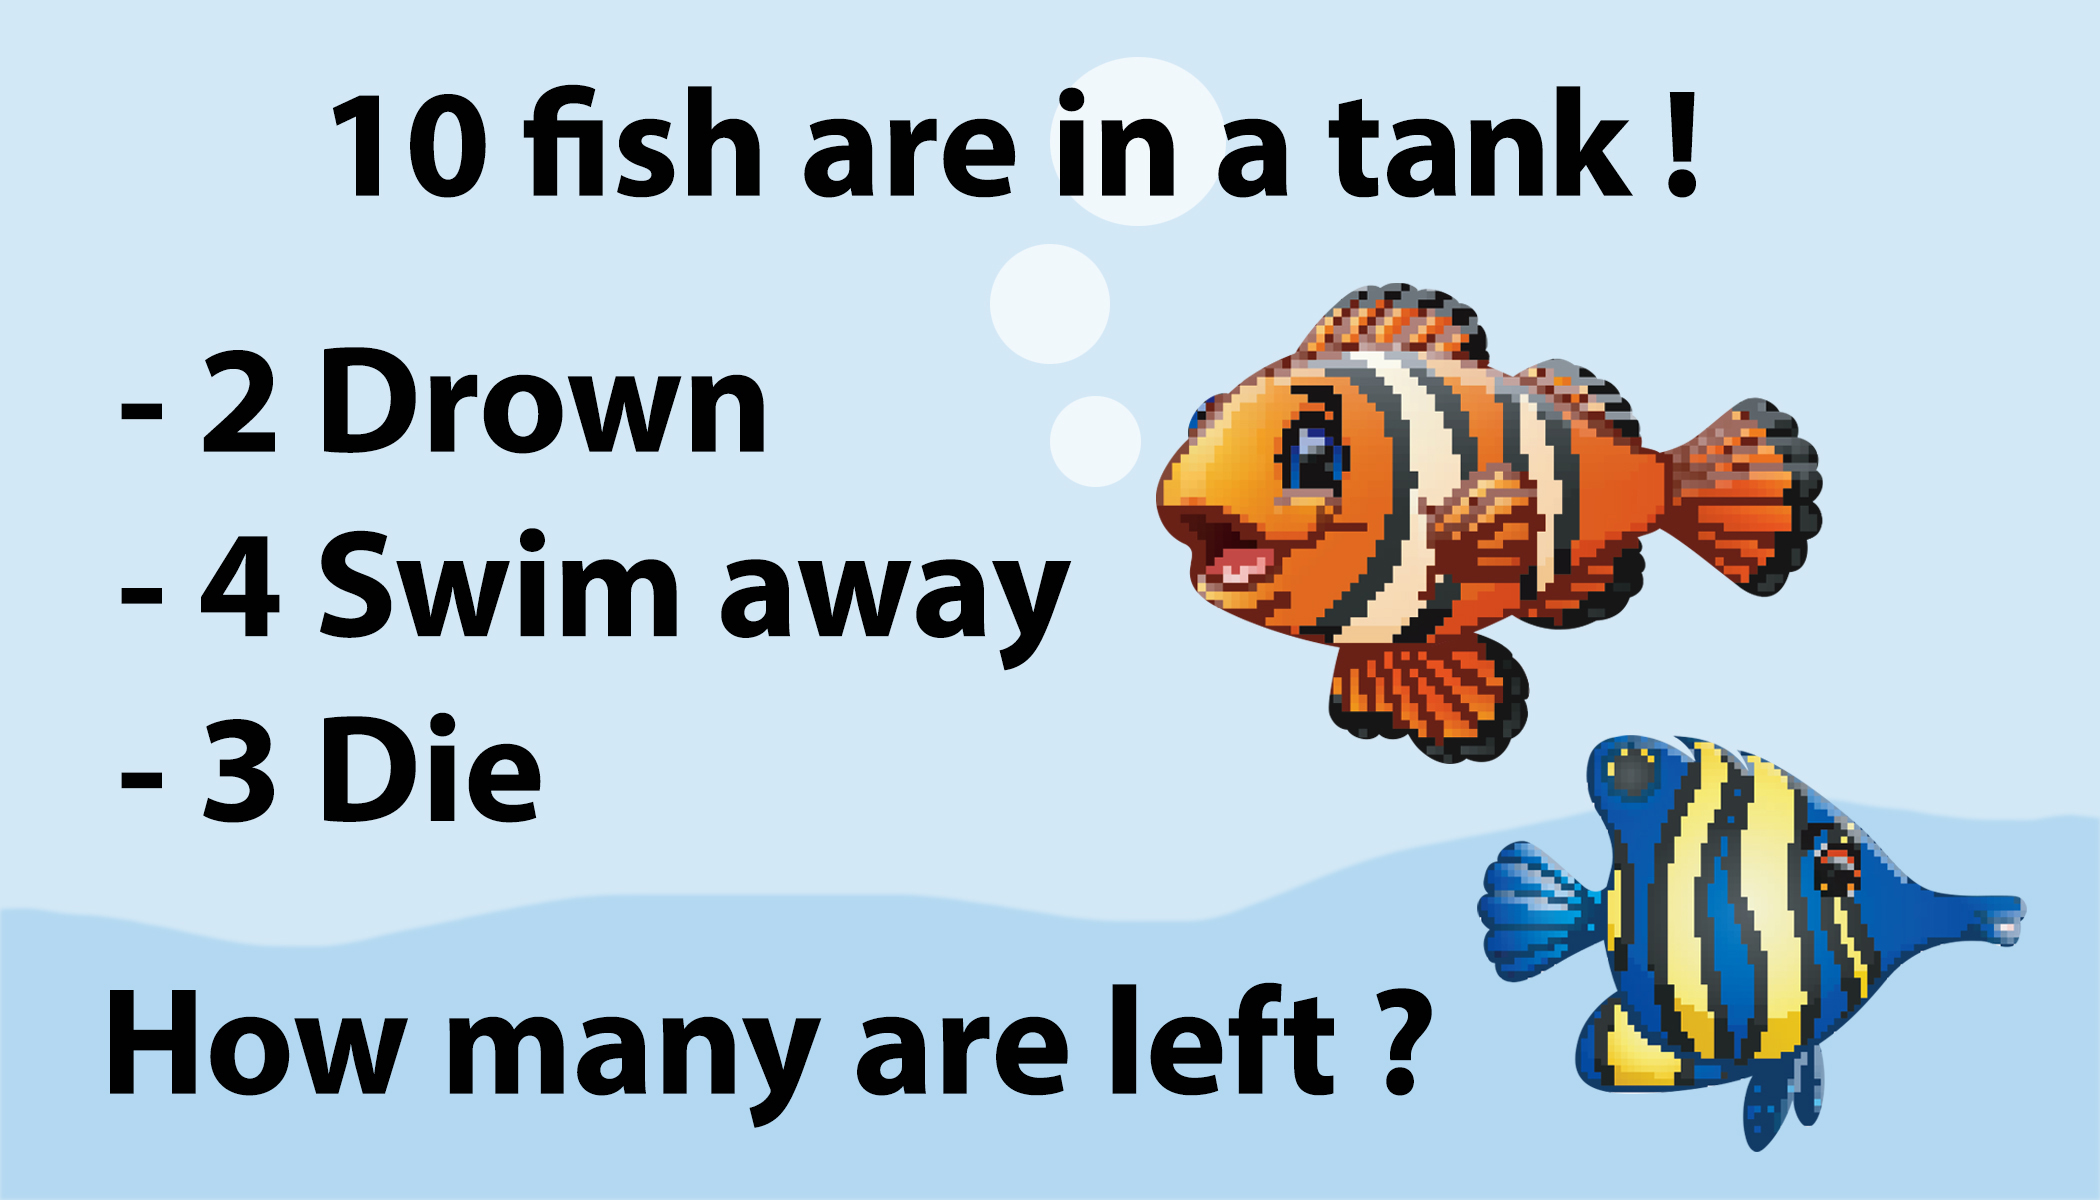 Fish Math Riddle Is Driving People Crazy Can You Solve It In Under 60 Seconds